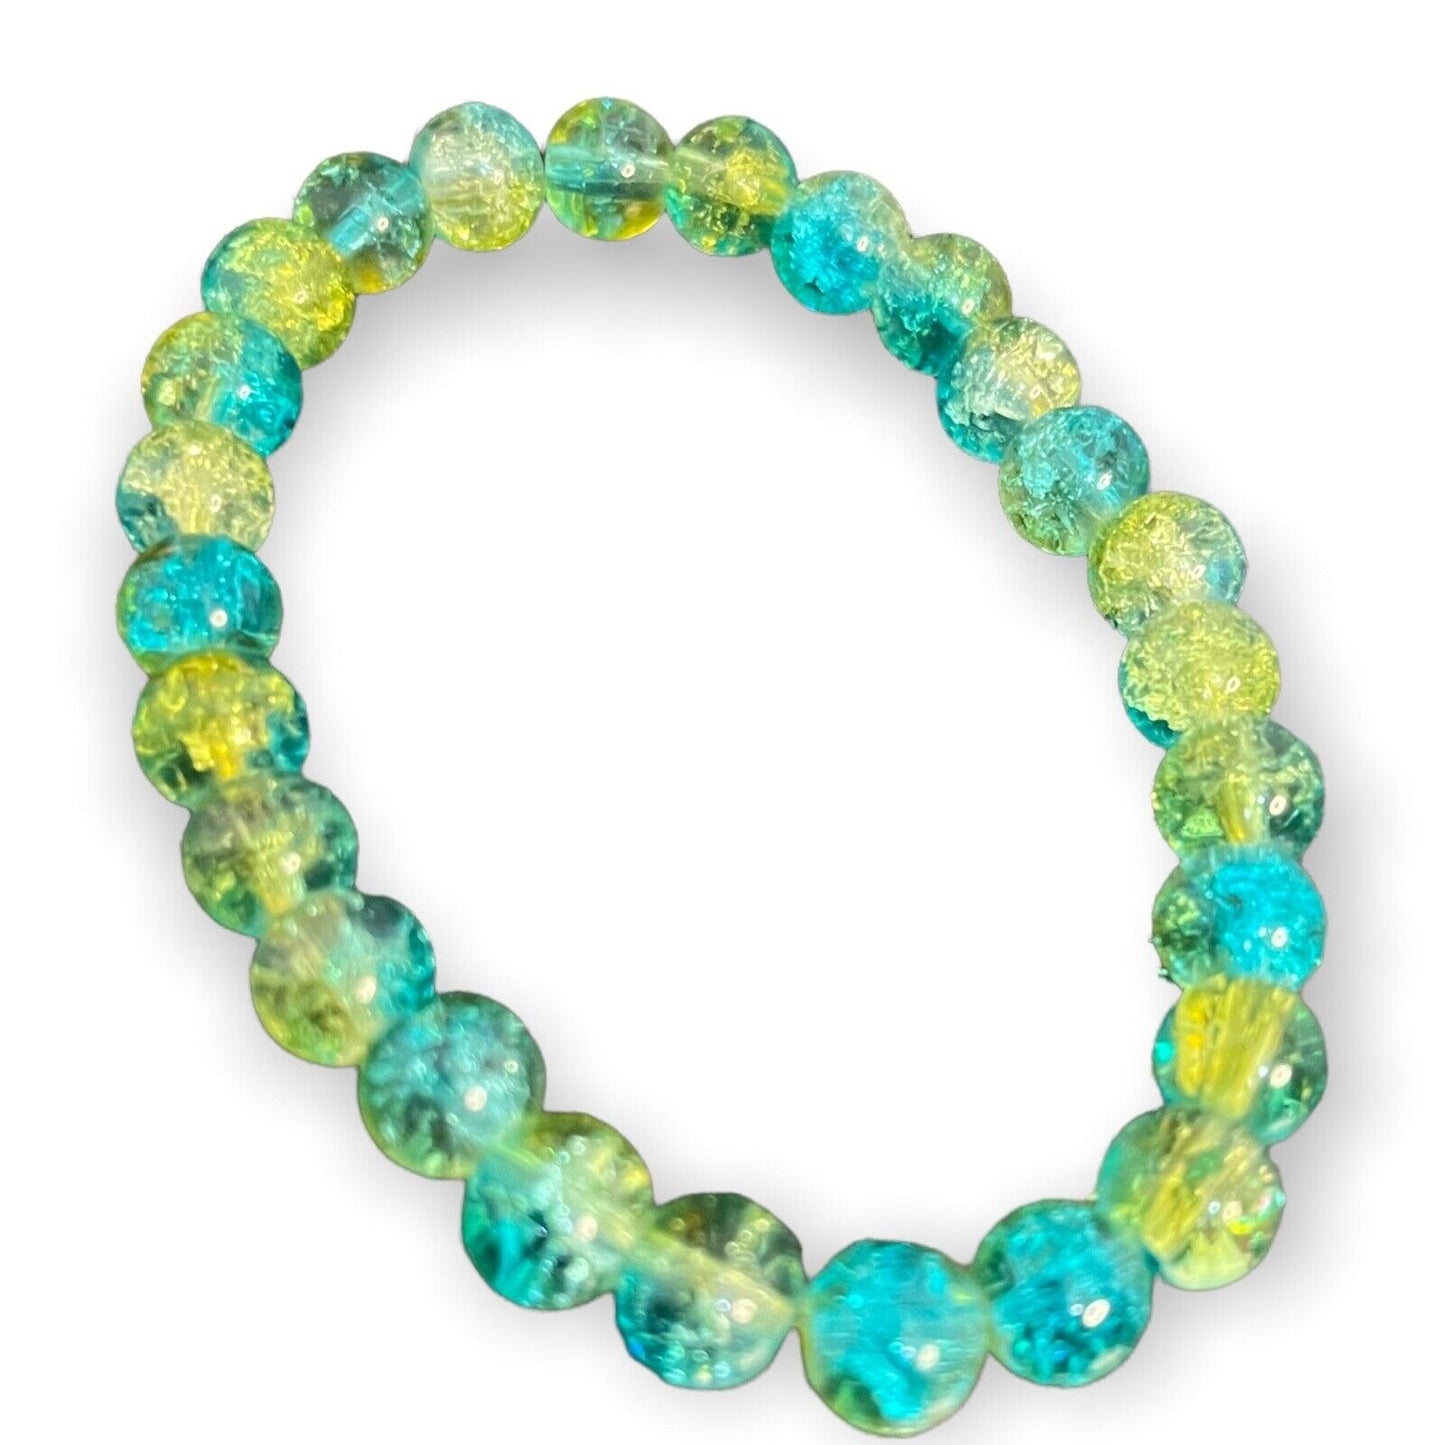 Handmade Shades Of Blue And Green Bracelet Unisex One Size Stretchy Crack Glass